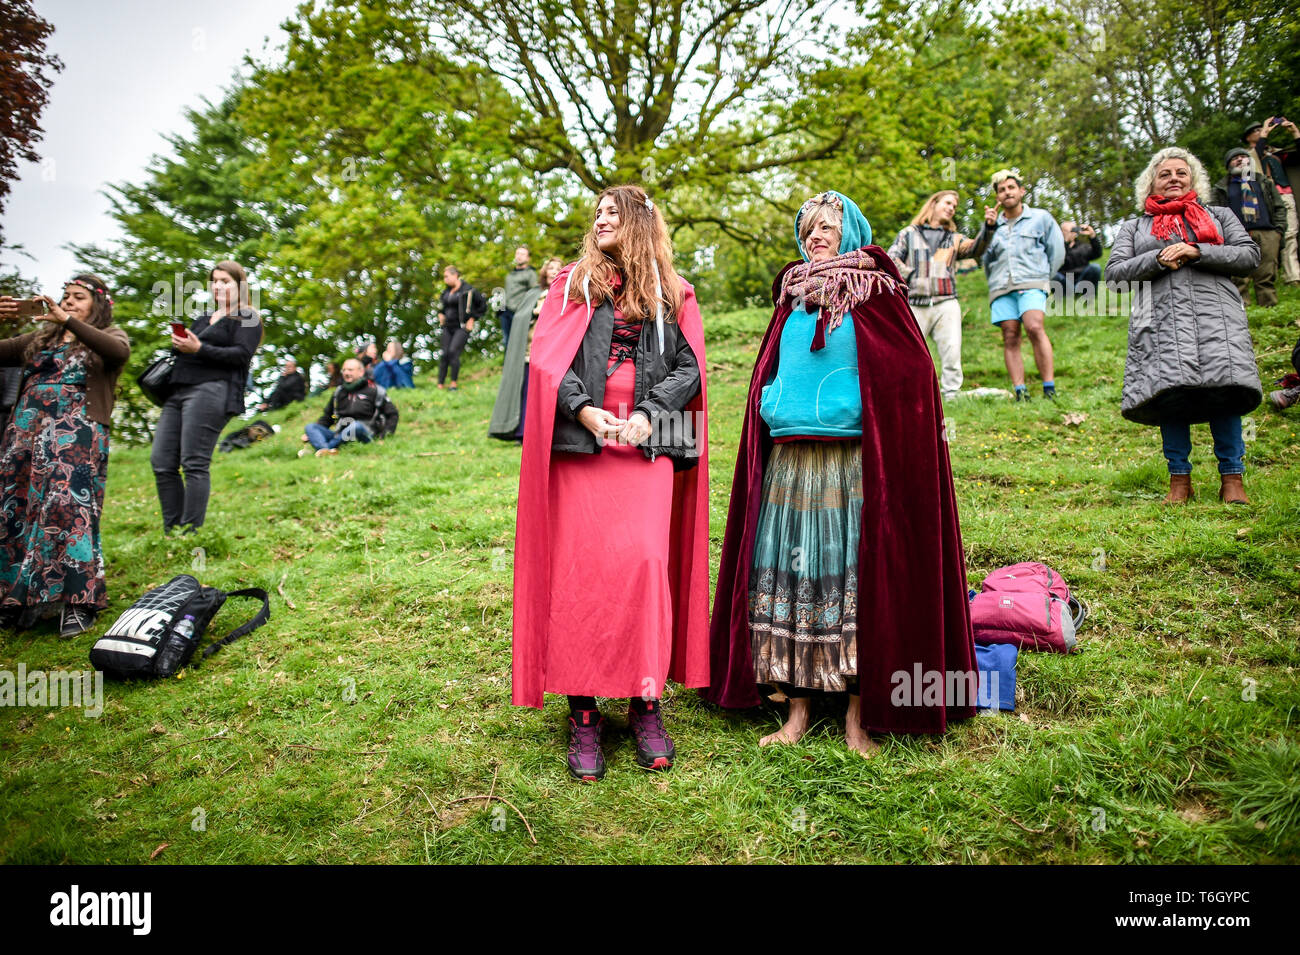 People dress in robes during the Beltane celebrations at Glastonbury Chalice Well, where people gather to observe a modern interpretation of the ancient Celtic pagan fertility rite of Spring. Stock Photo